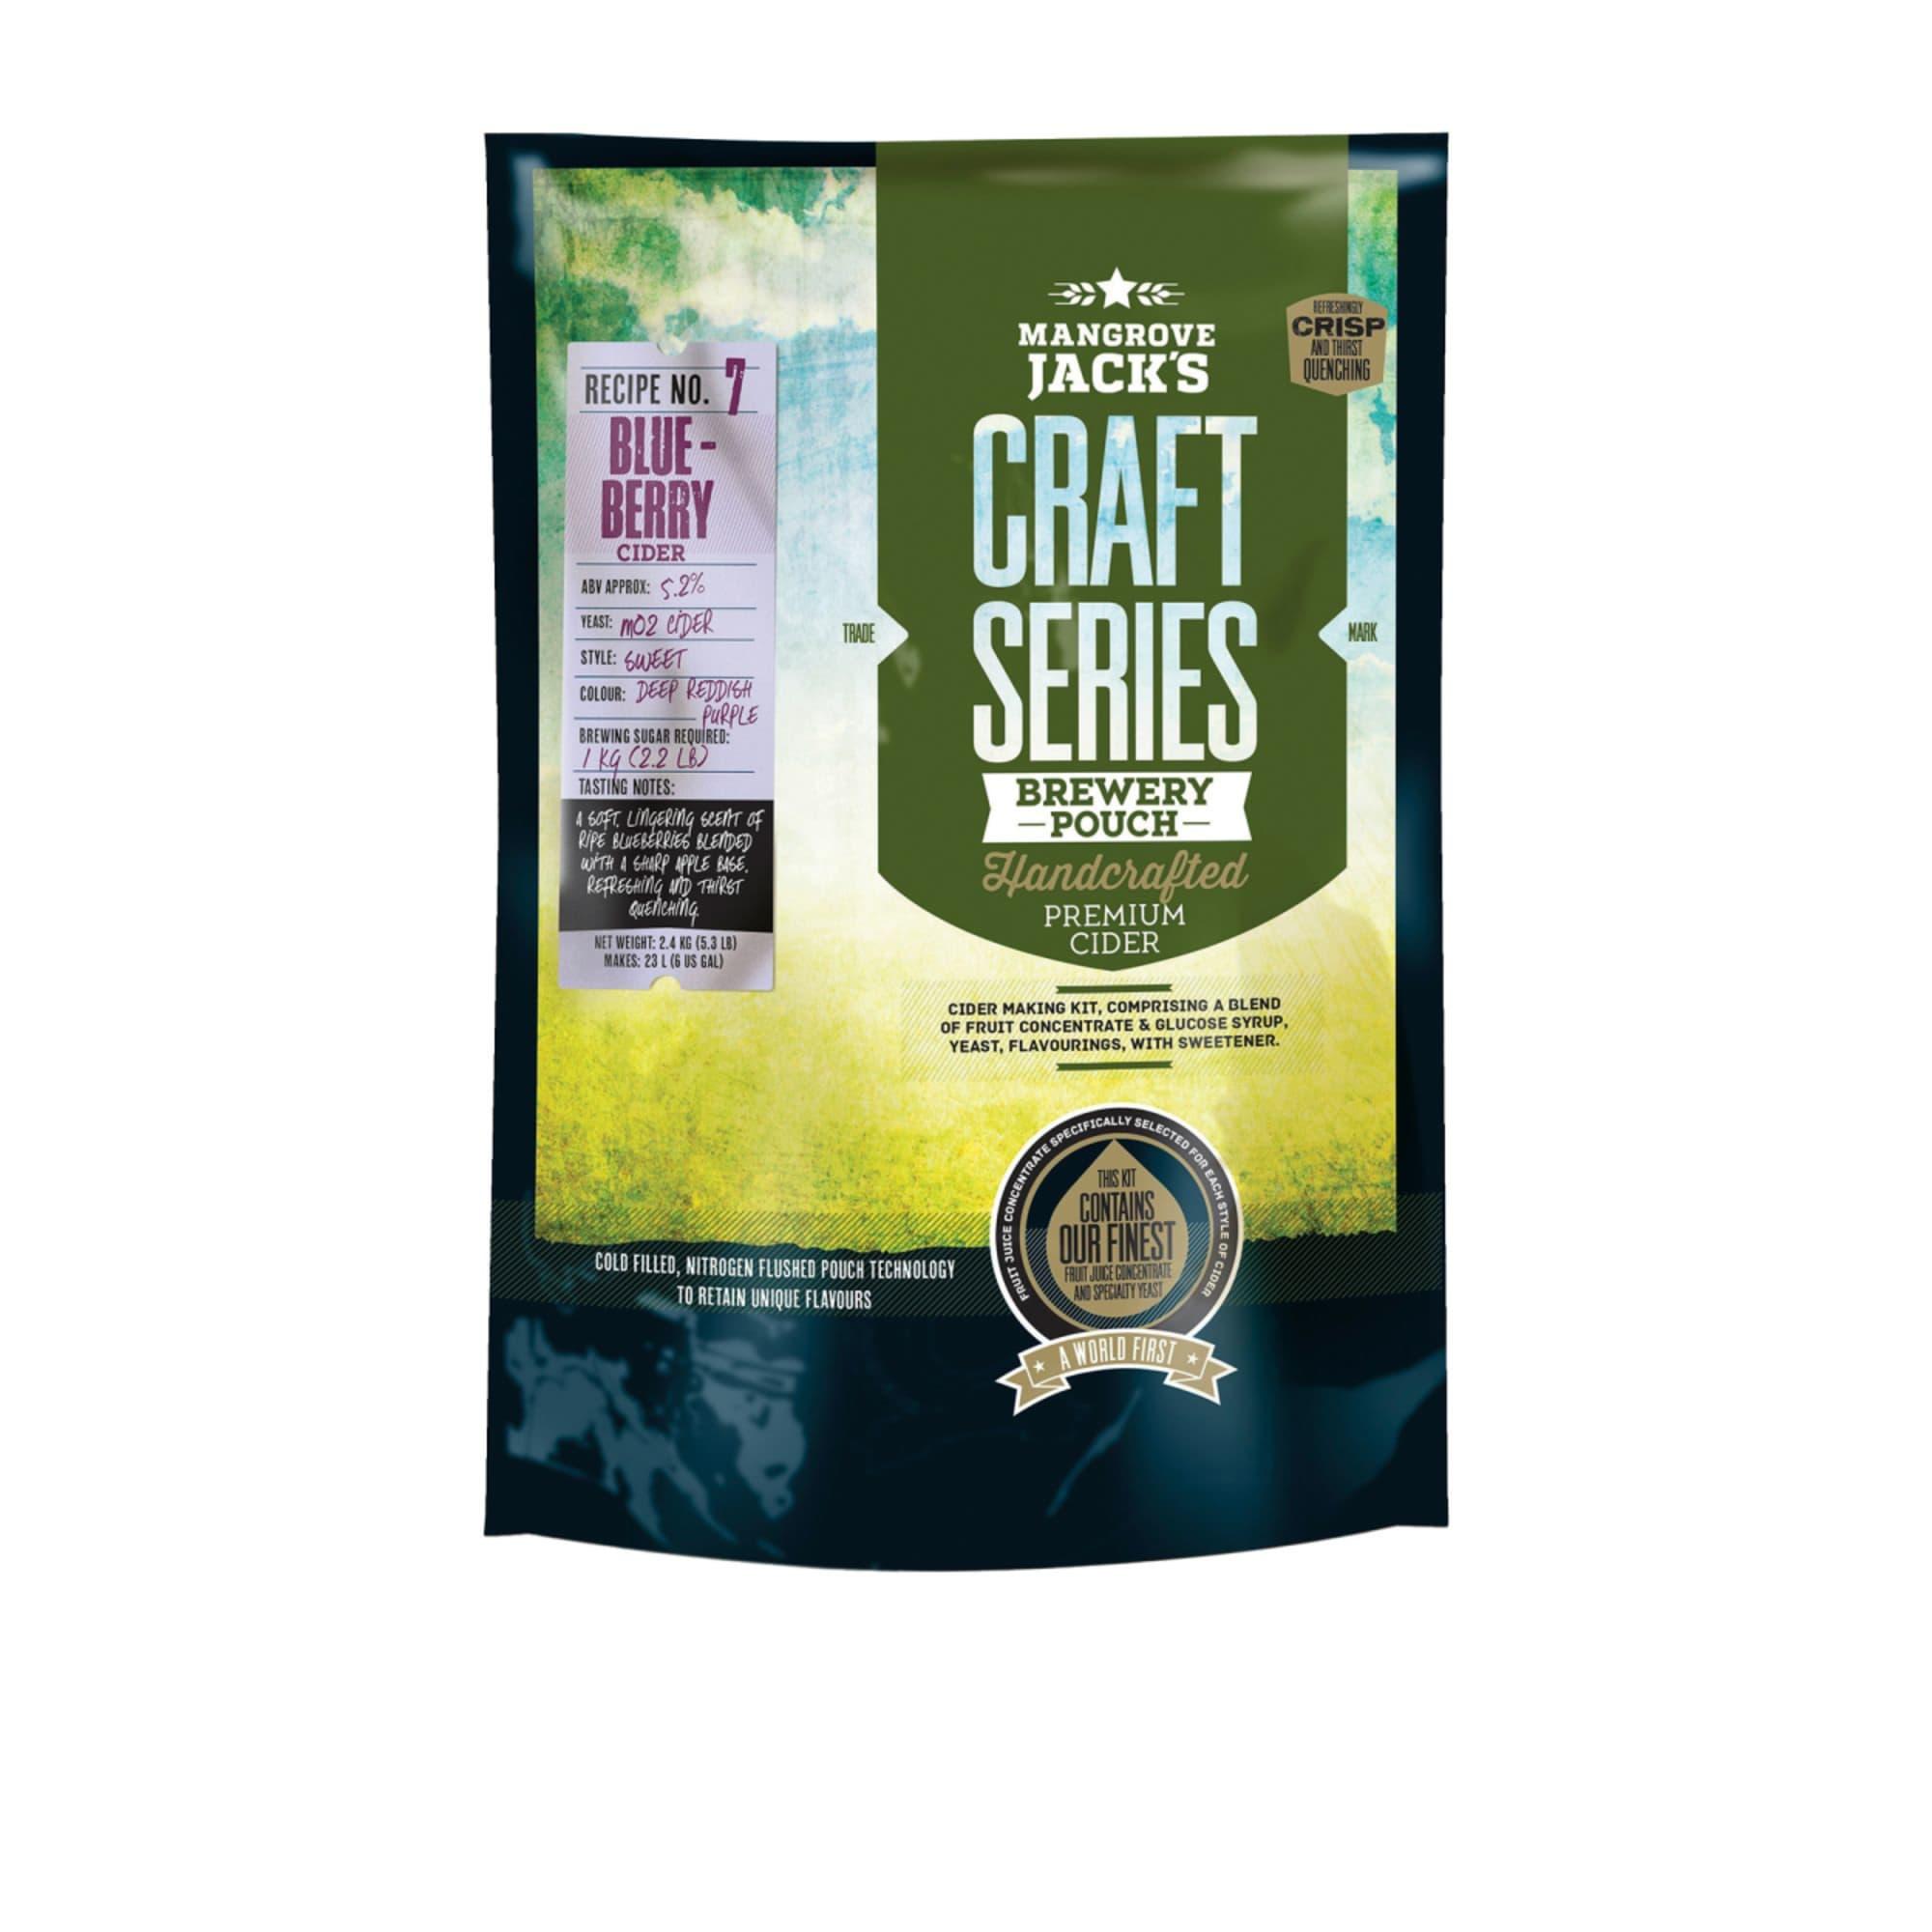 Mangrove Jack's Craft Series Brewery Pouch Blueberry Cider Image 1